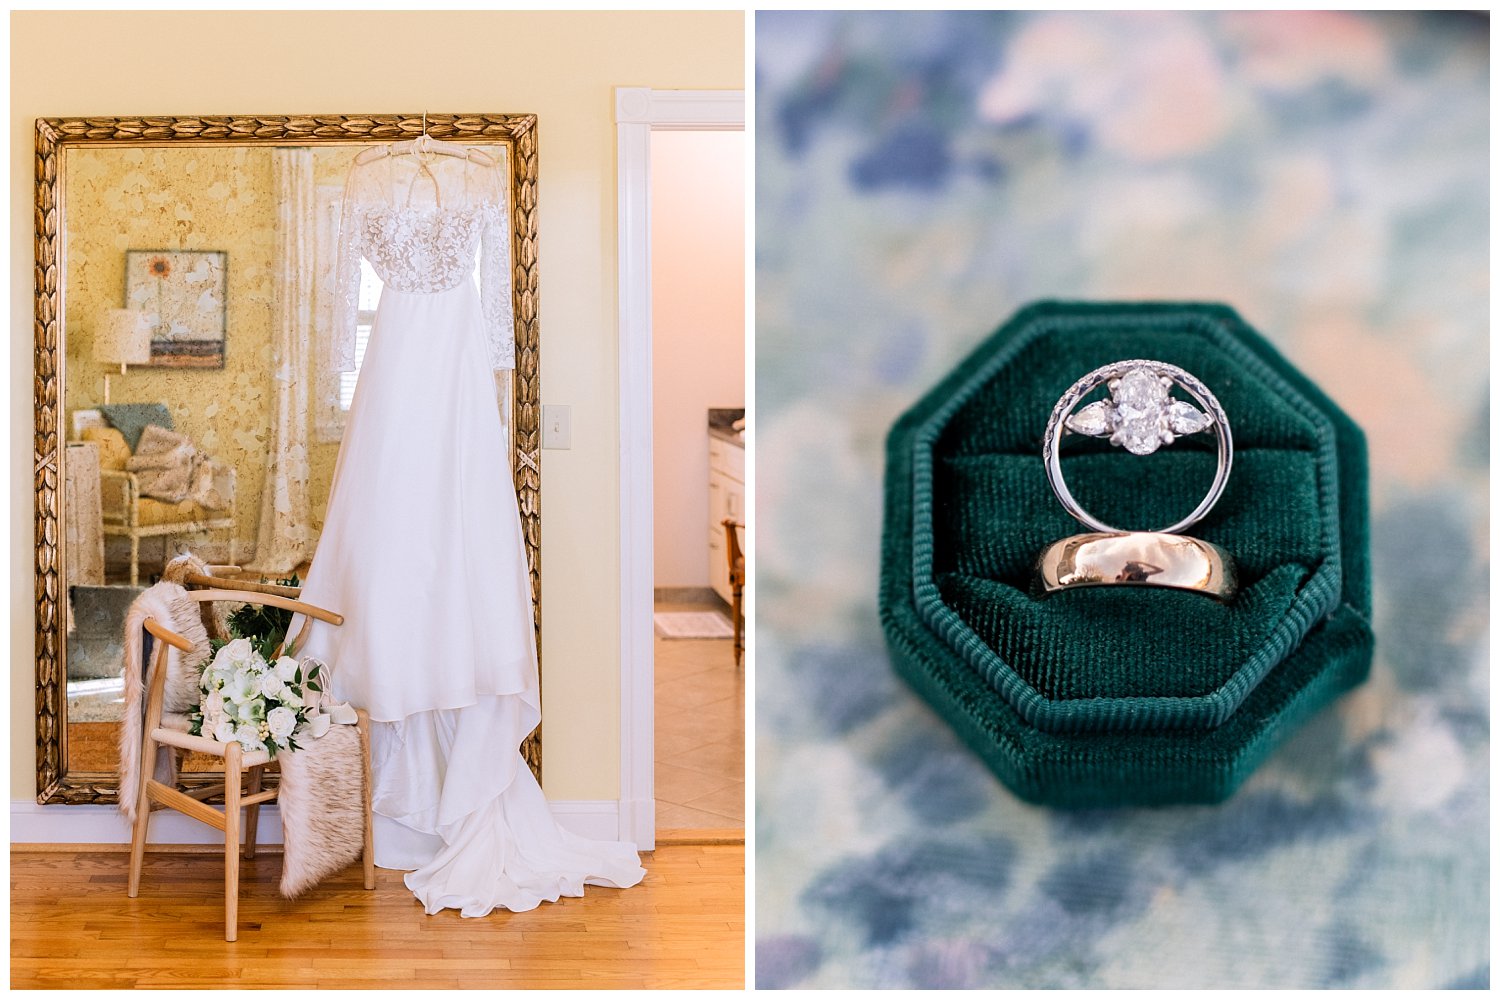 Wedding dress and wedding rings at Early Mountain Vineyard in Charlottesville, Virginia